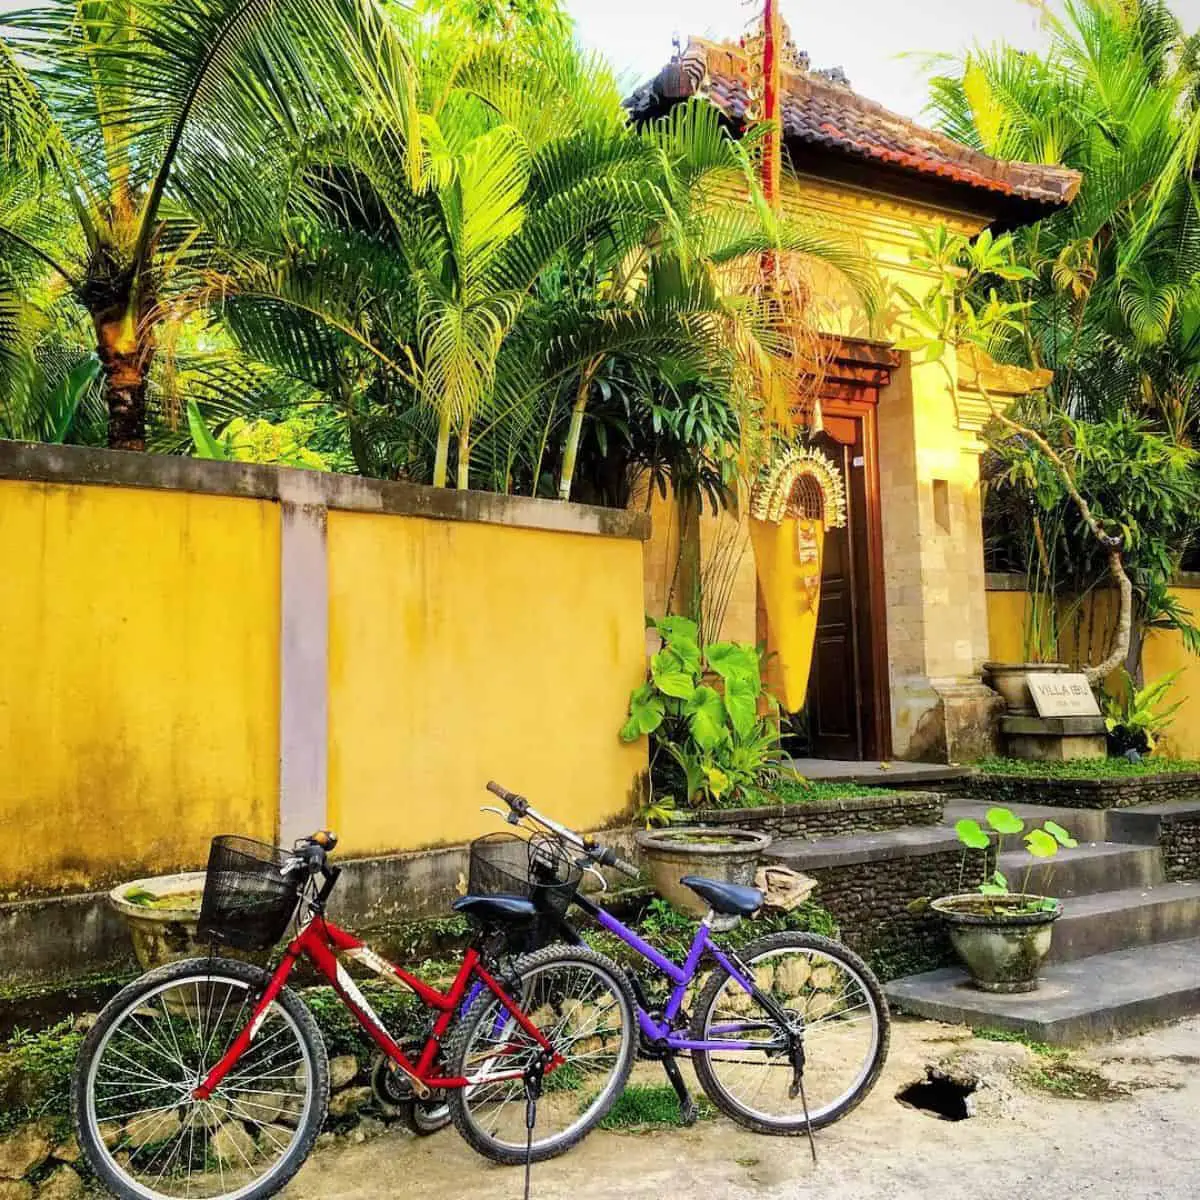 Two bicycles in red and purple in front of an entrance gate